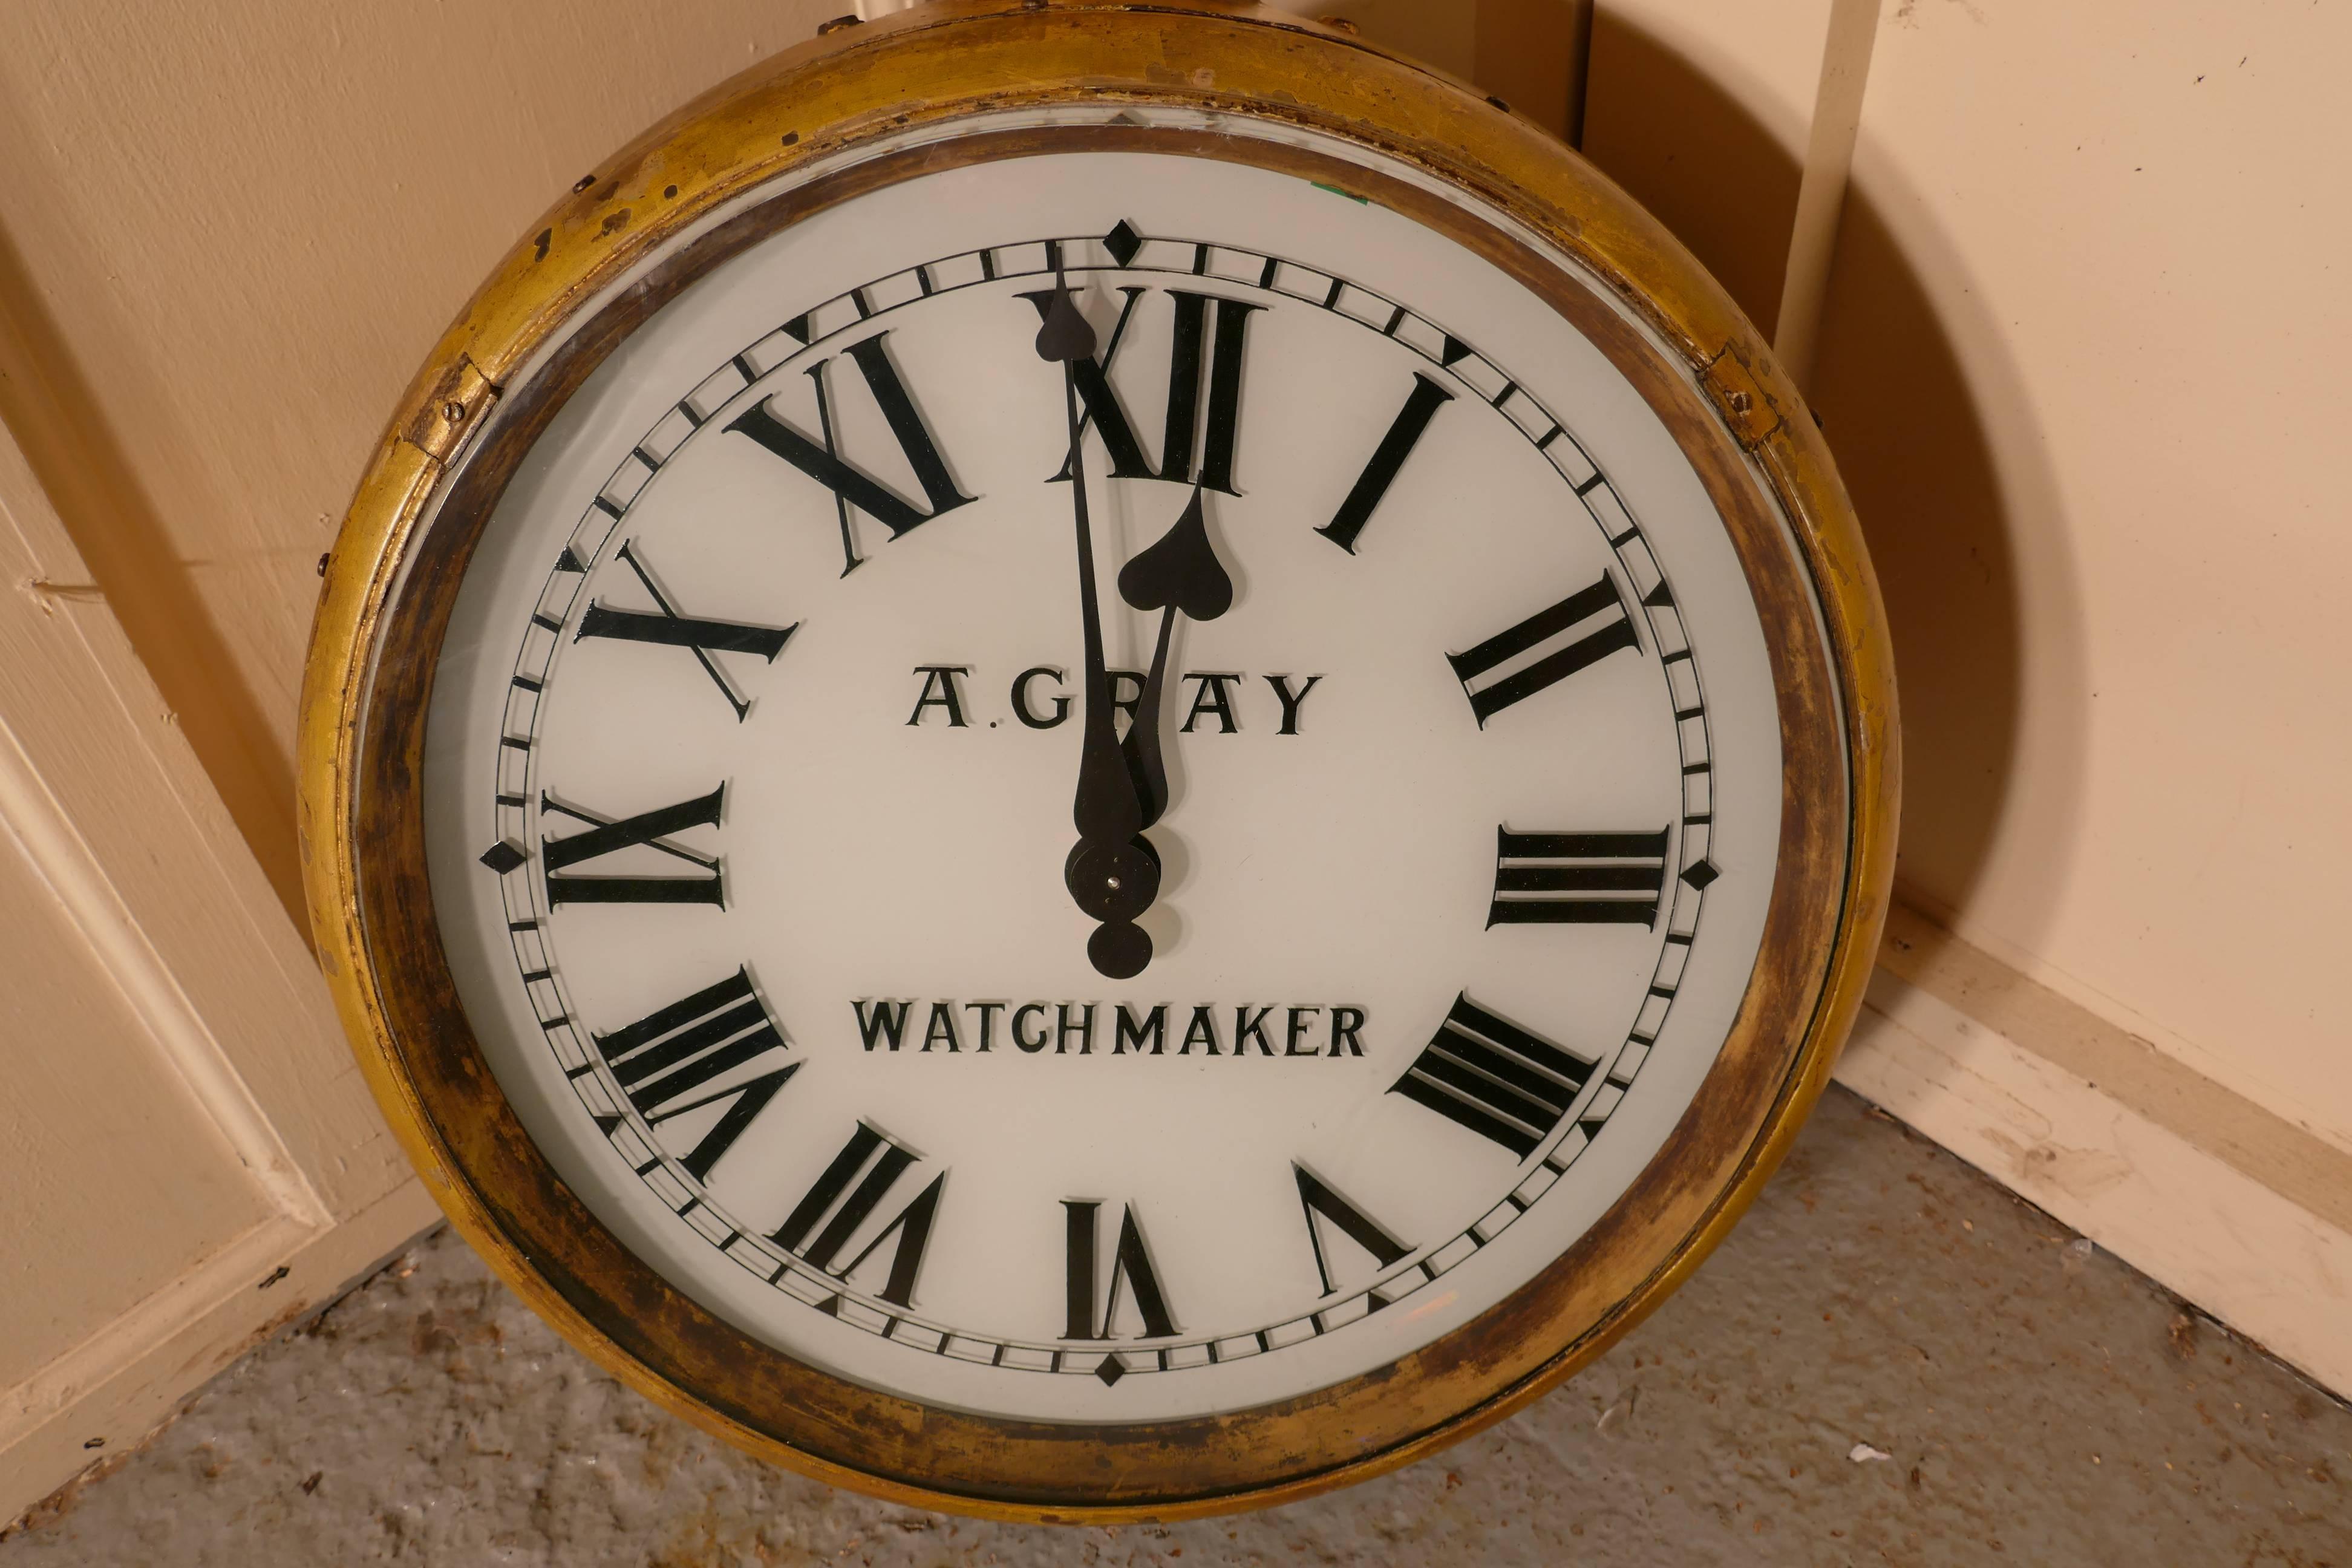 A watch makers shop trades sign, giant pocket watch

What a great piece to hang outside a watch or clock shop, this one was made in the 1900s, it is totally three dimensional, a giant gold watch which can be suspended by its bow ring, but